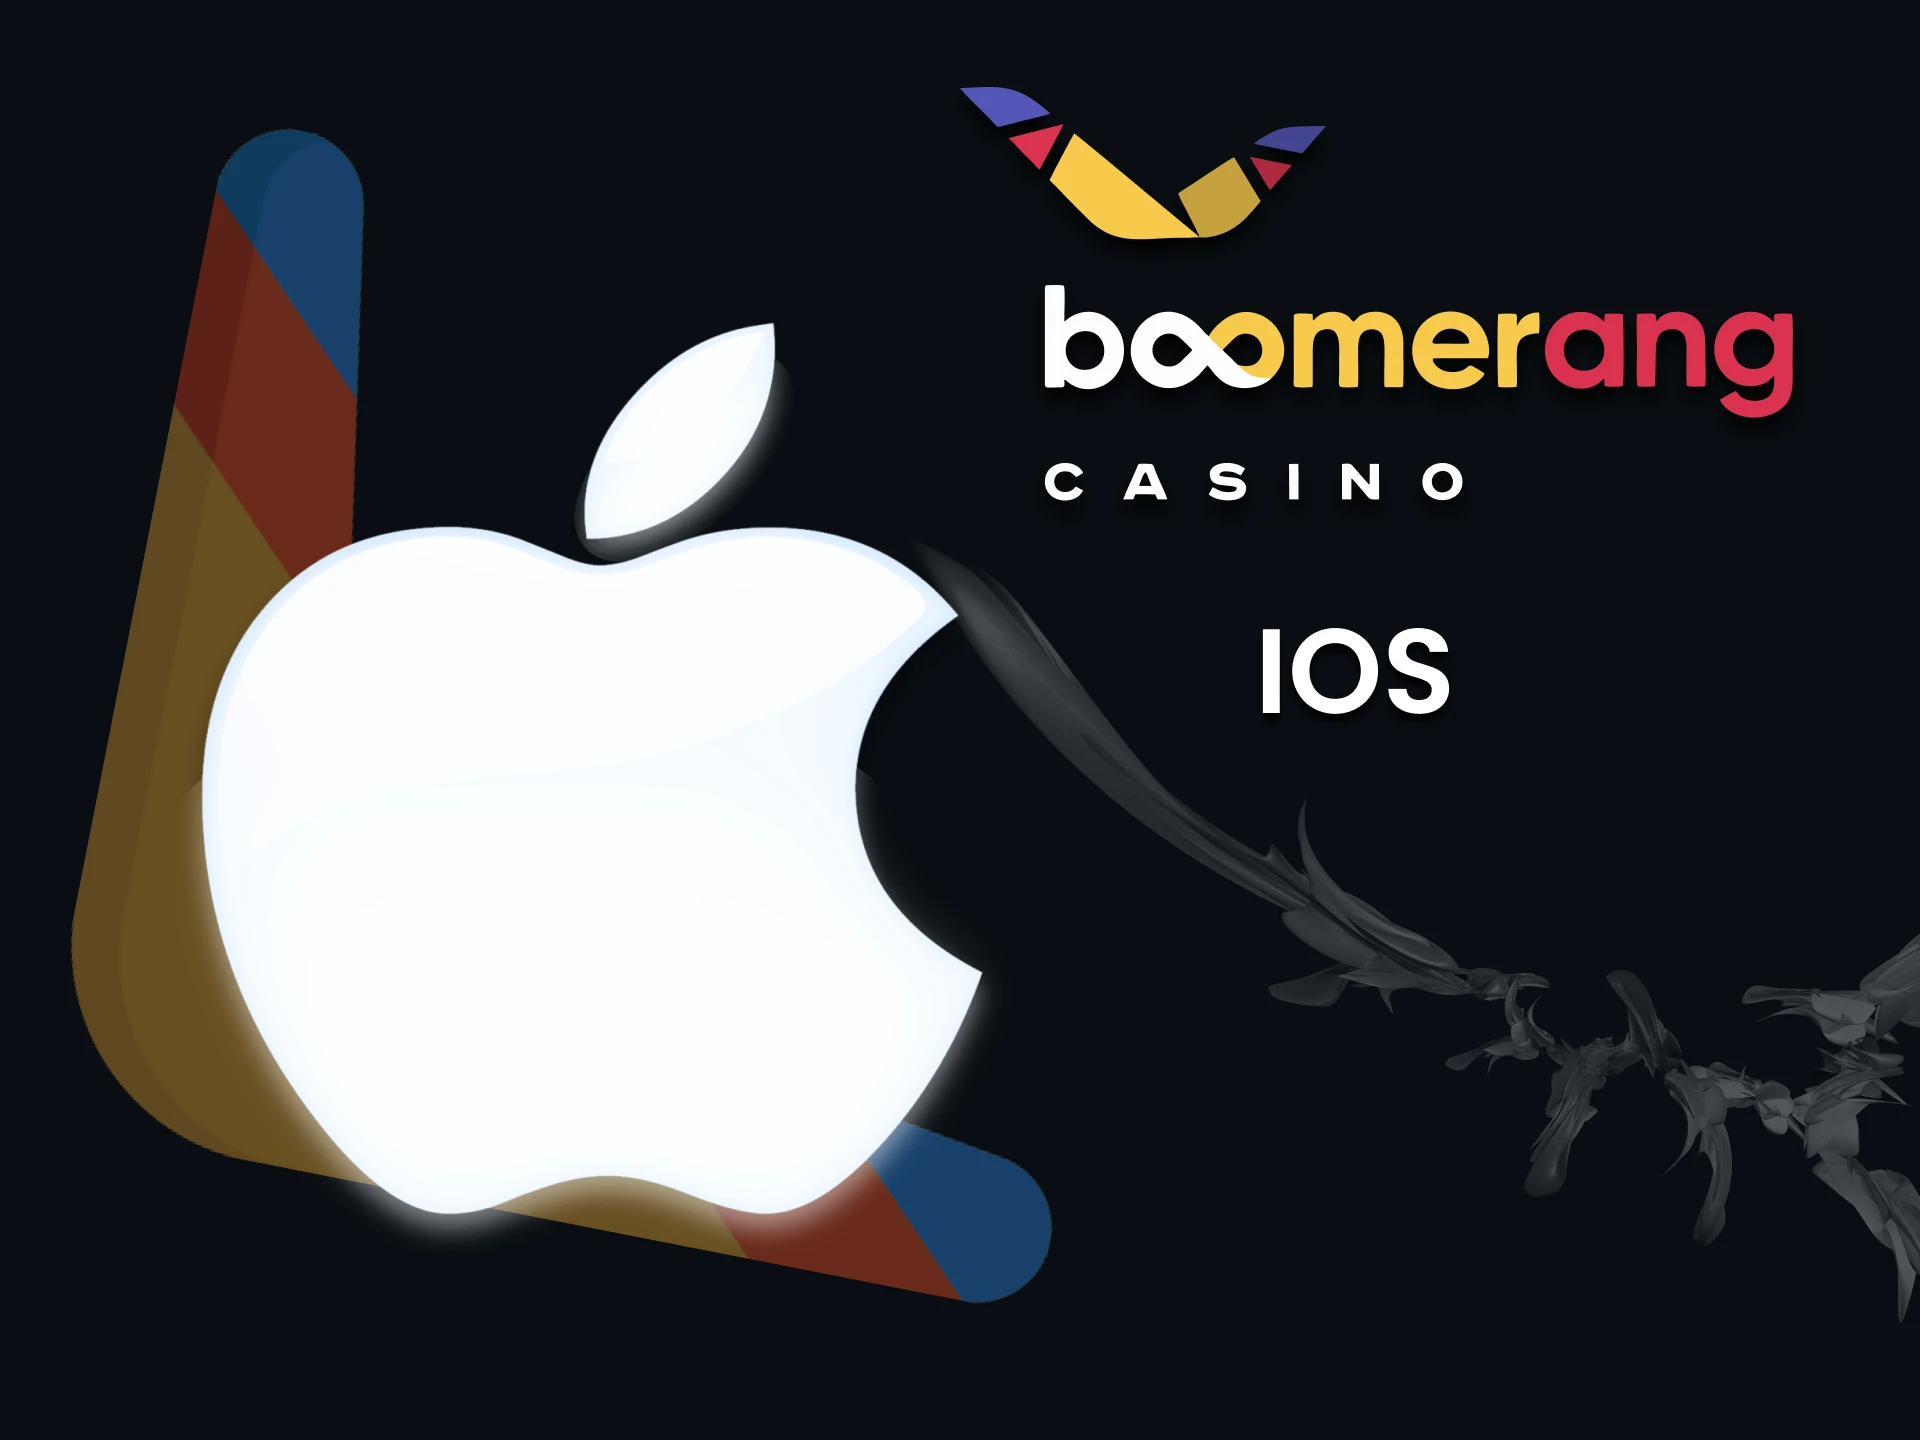 Use the Bommerang Casino app for iOS.